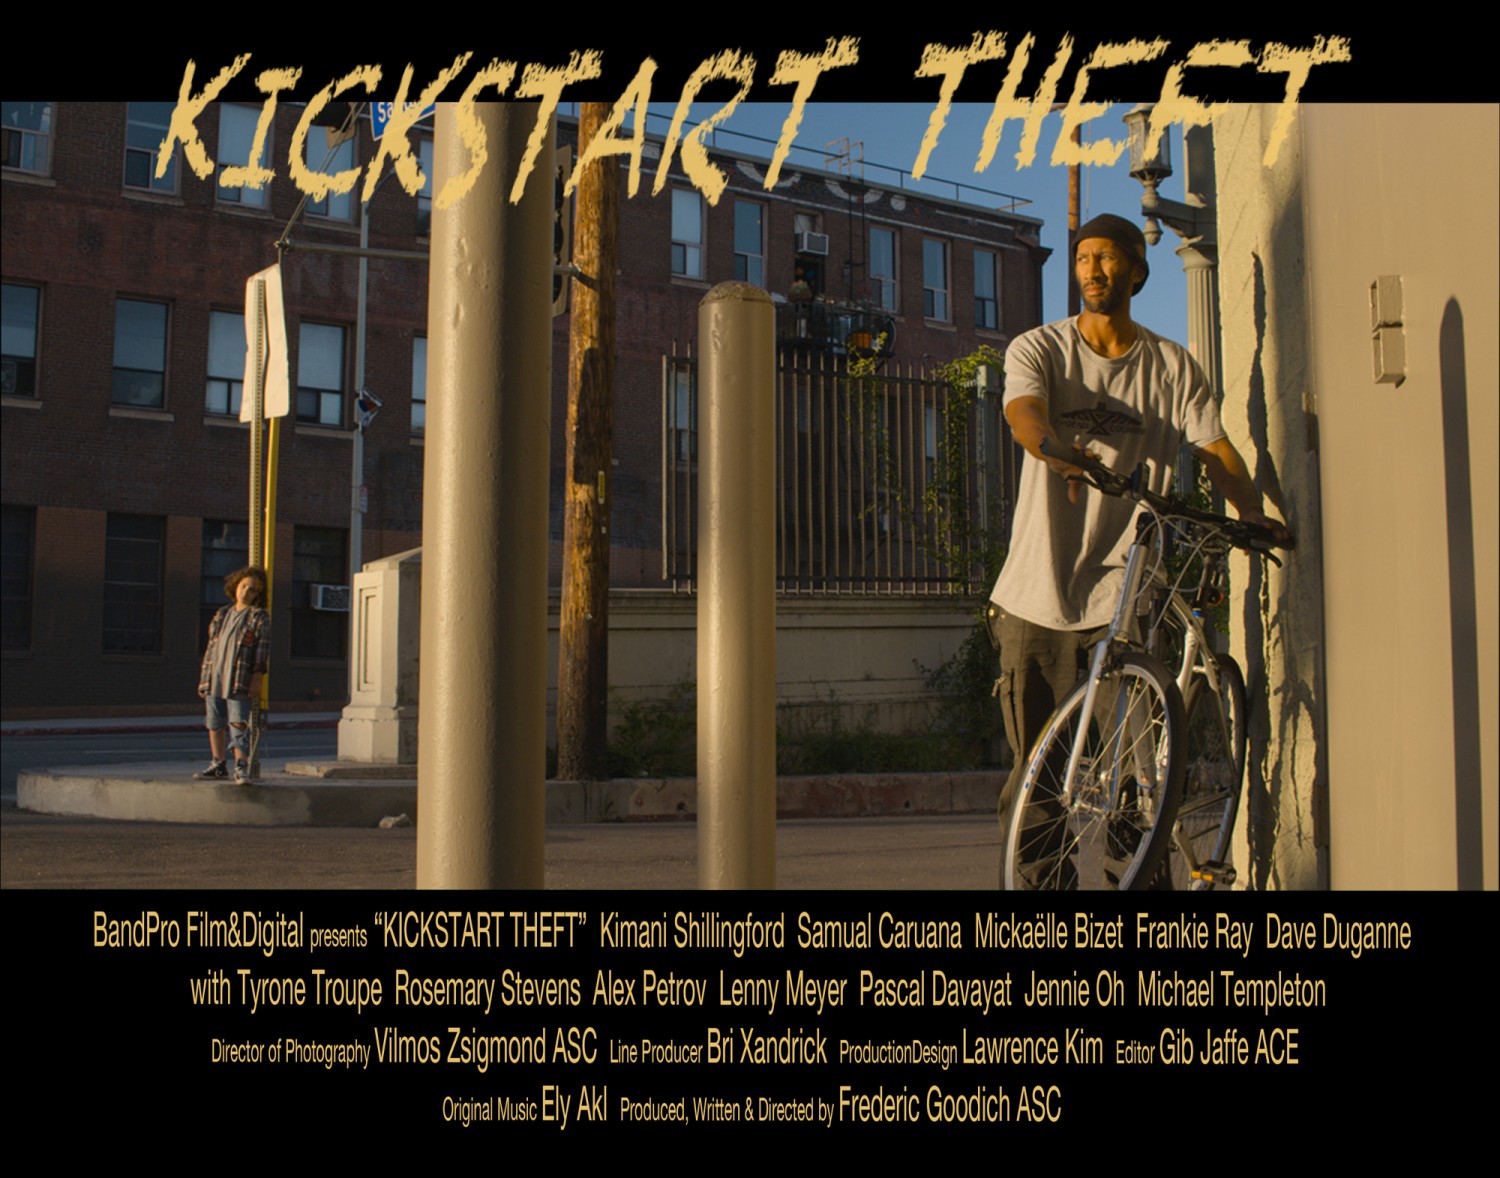 Extra Large Movie Poster Image for Kickstart Theft